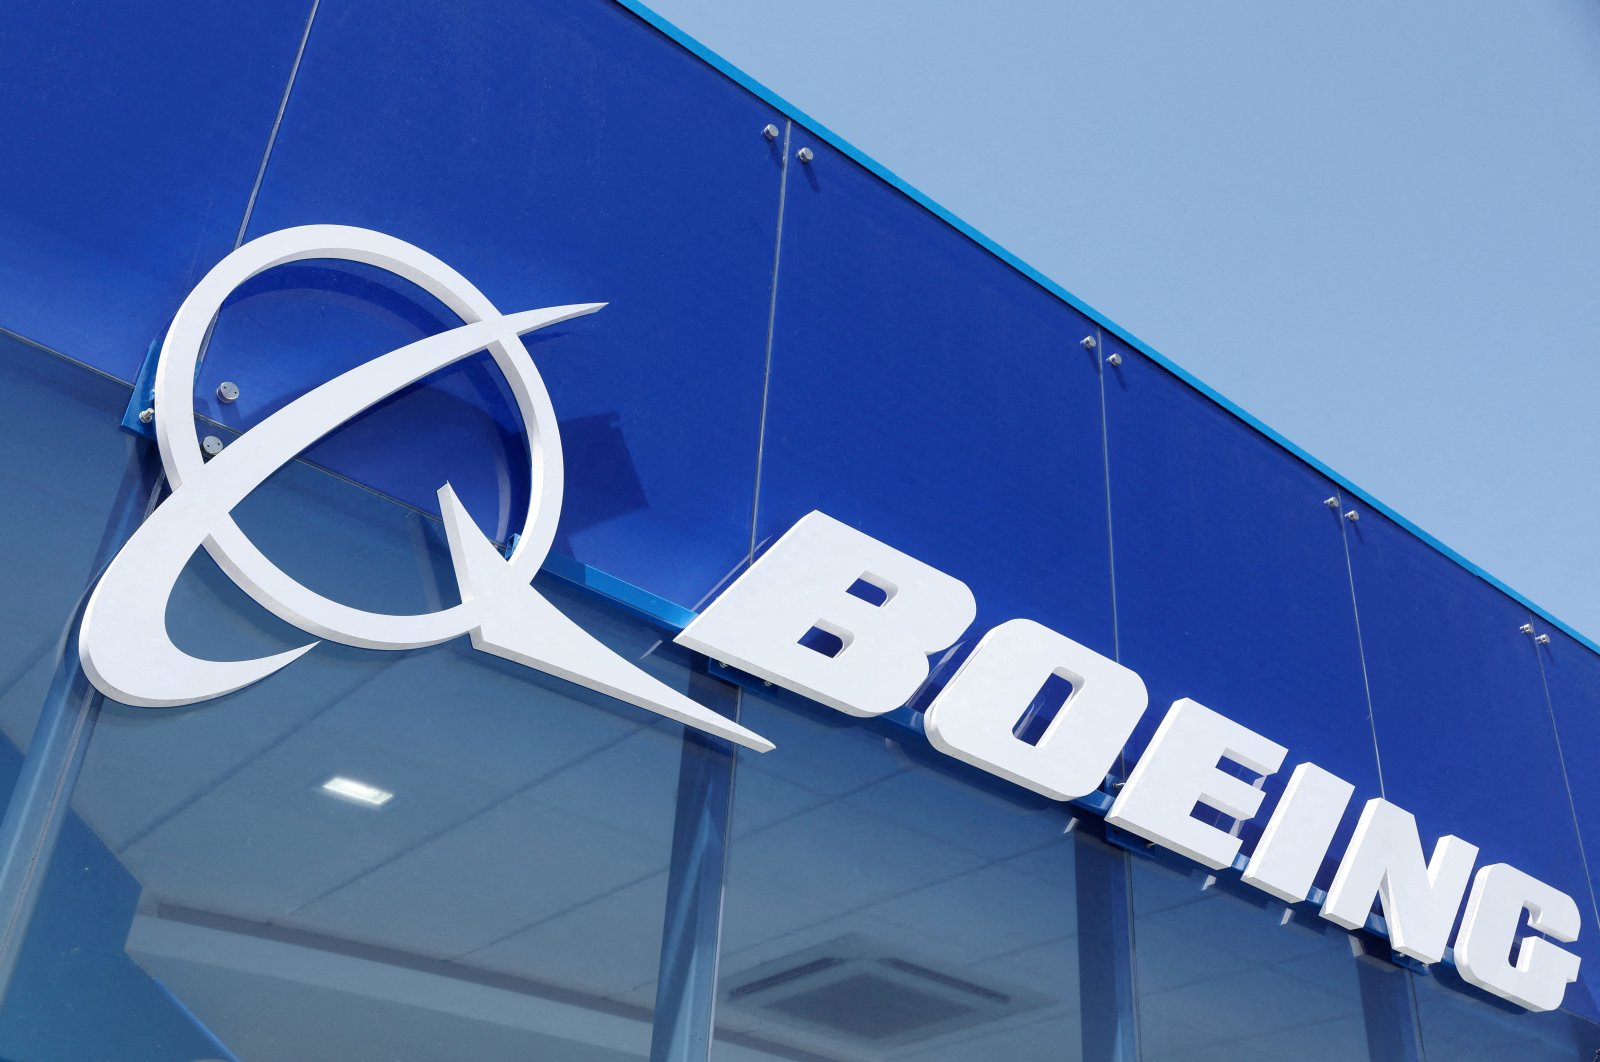 Signage for Boeing is seen on a trade pavilion at the Farnborough International Airshow, in Farnborough, Britain, July 19, 2022. (Reuters Photo)